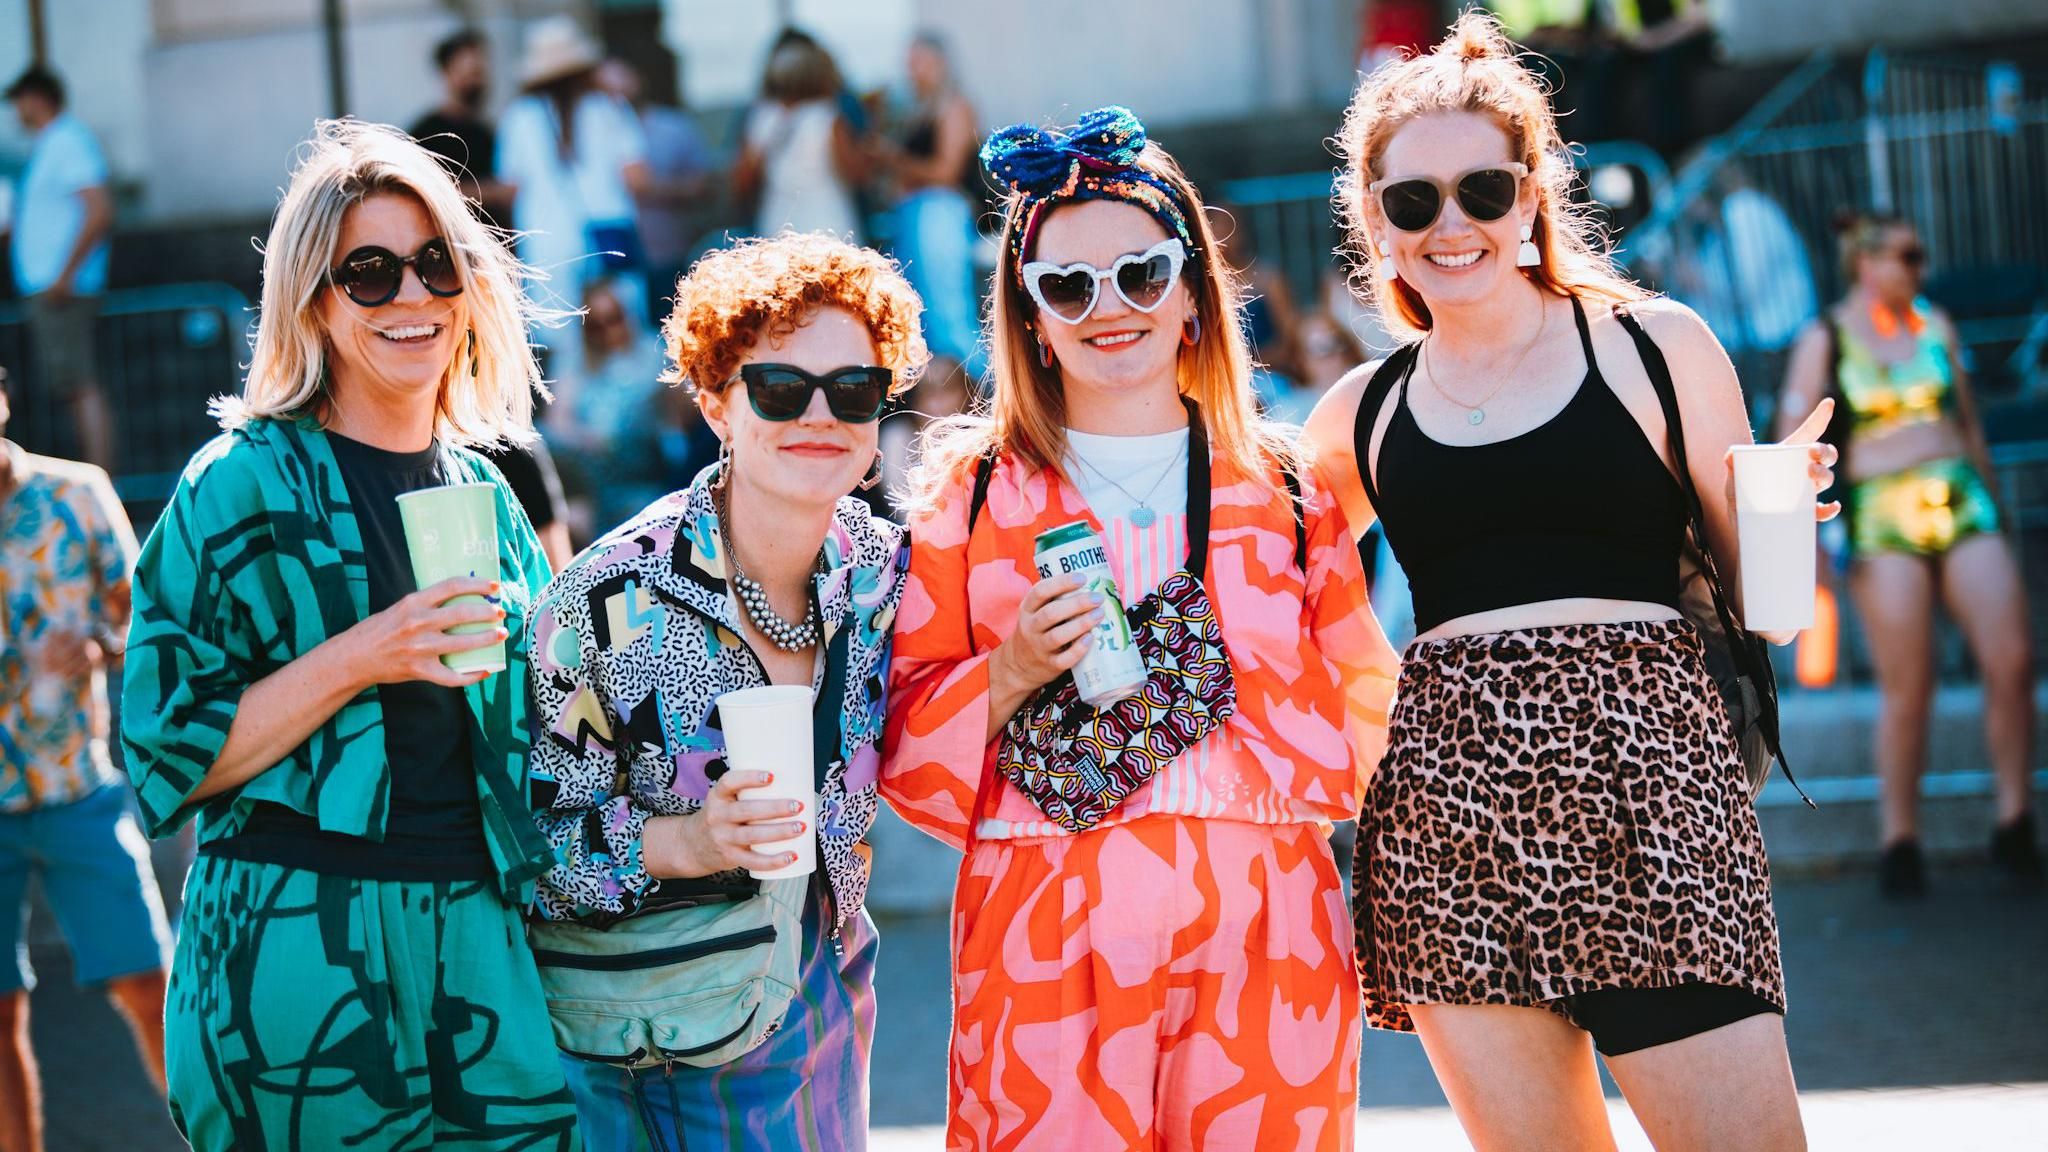 A group of four young women smile at the camera ahead of the Annie Mac gig on Saturday night